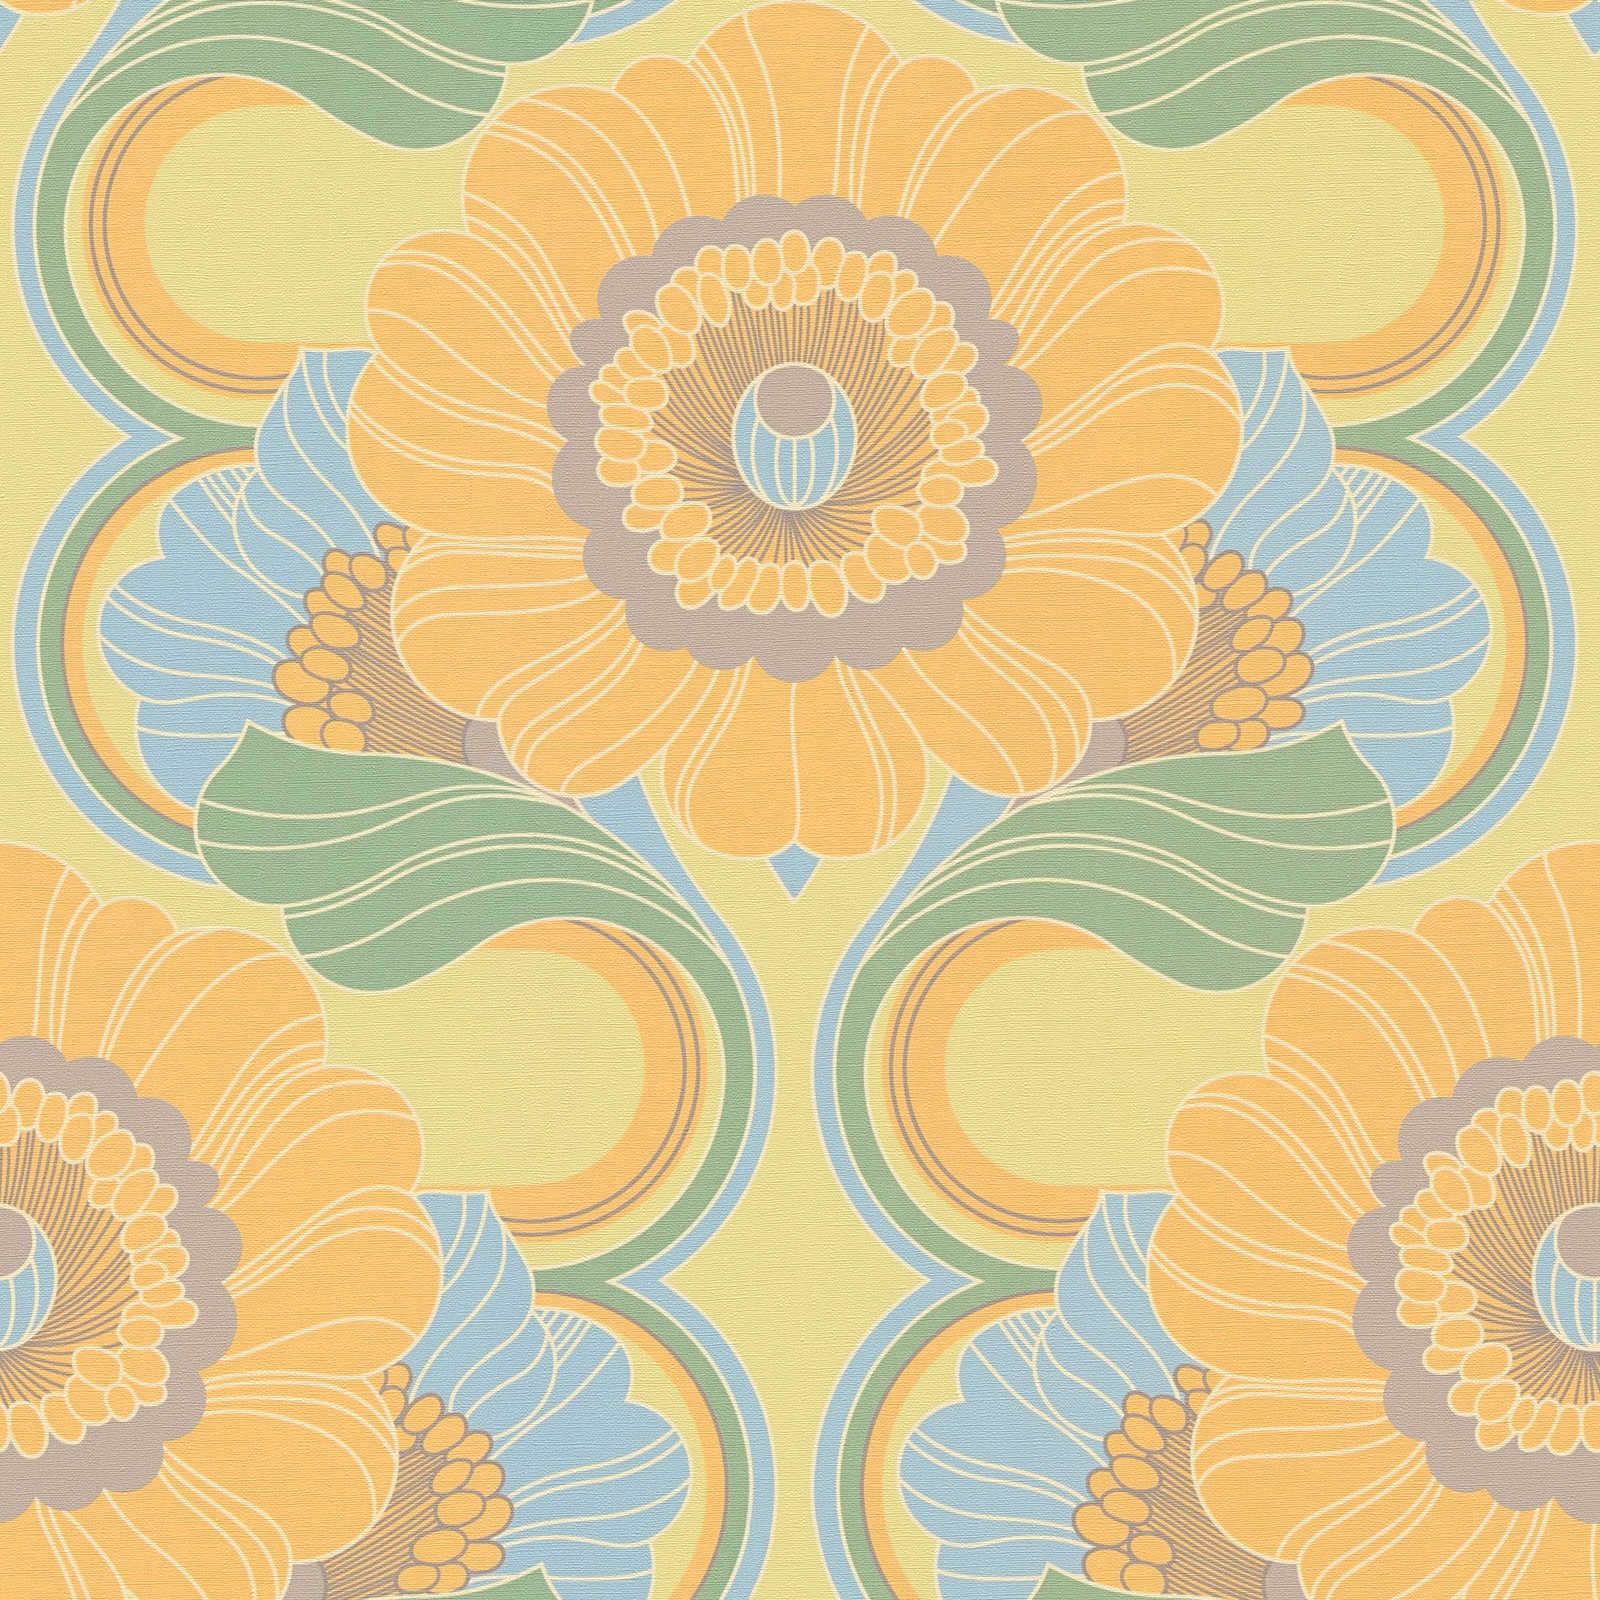             Lightly textured retro wallpaper with floral pattern - blue, yellow, green
        